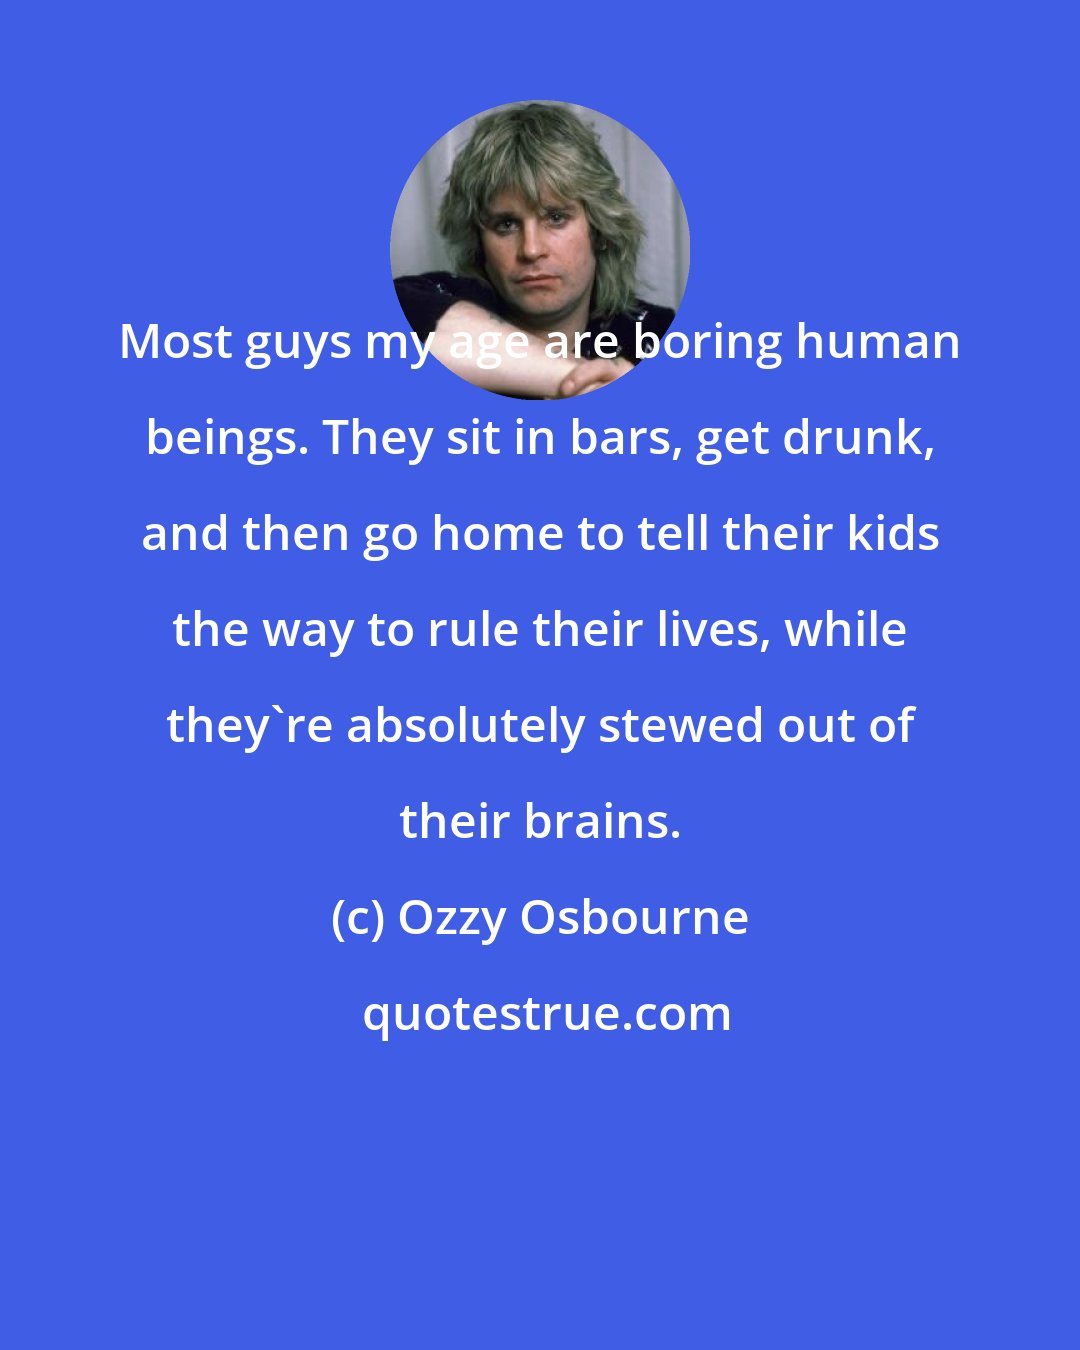 Ozzy Osbourne: Most guys my age are boring human beings. They sit in bars, get drunk, and then go home to tell their kids the way to rule their lives, while they're absolutely stewed out of their brains.